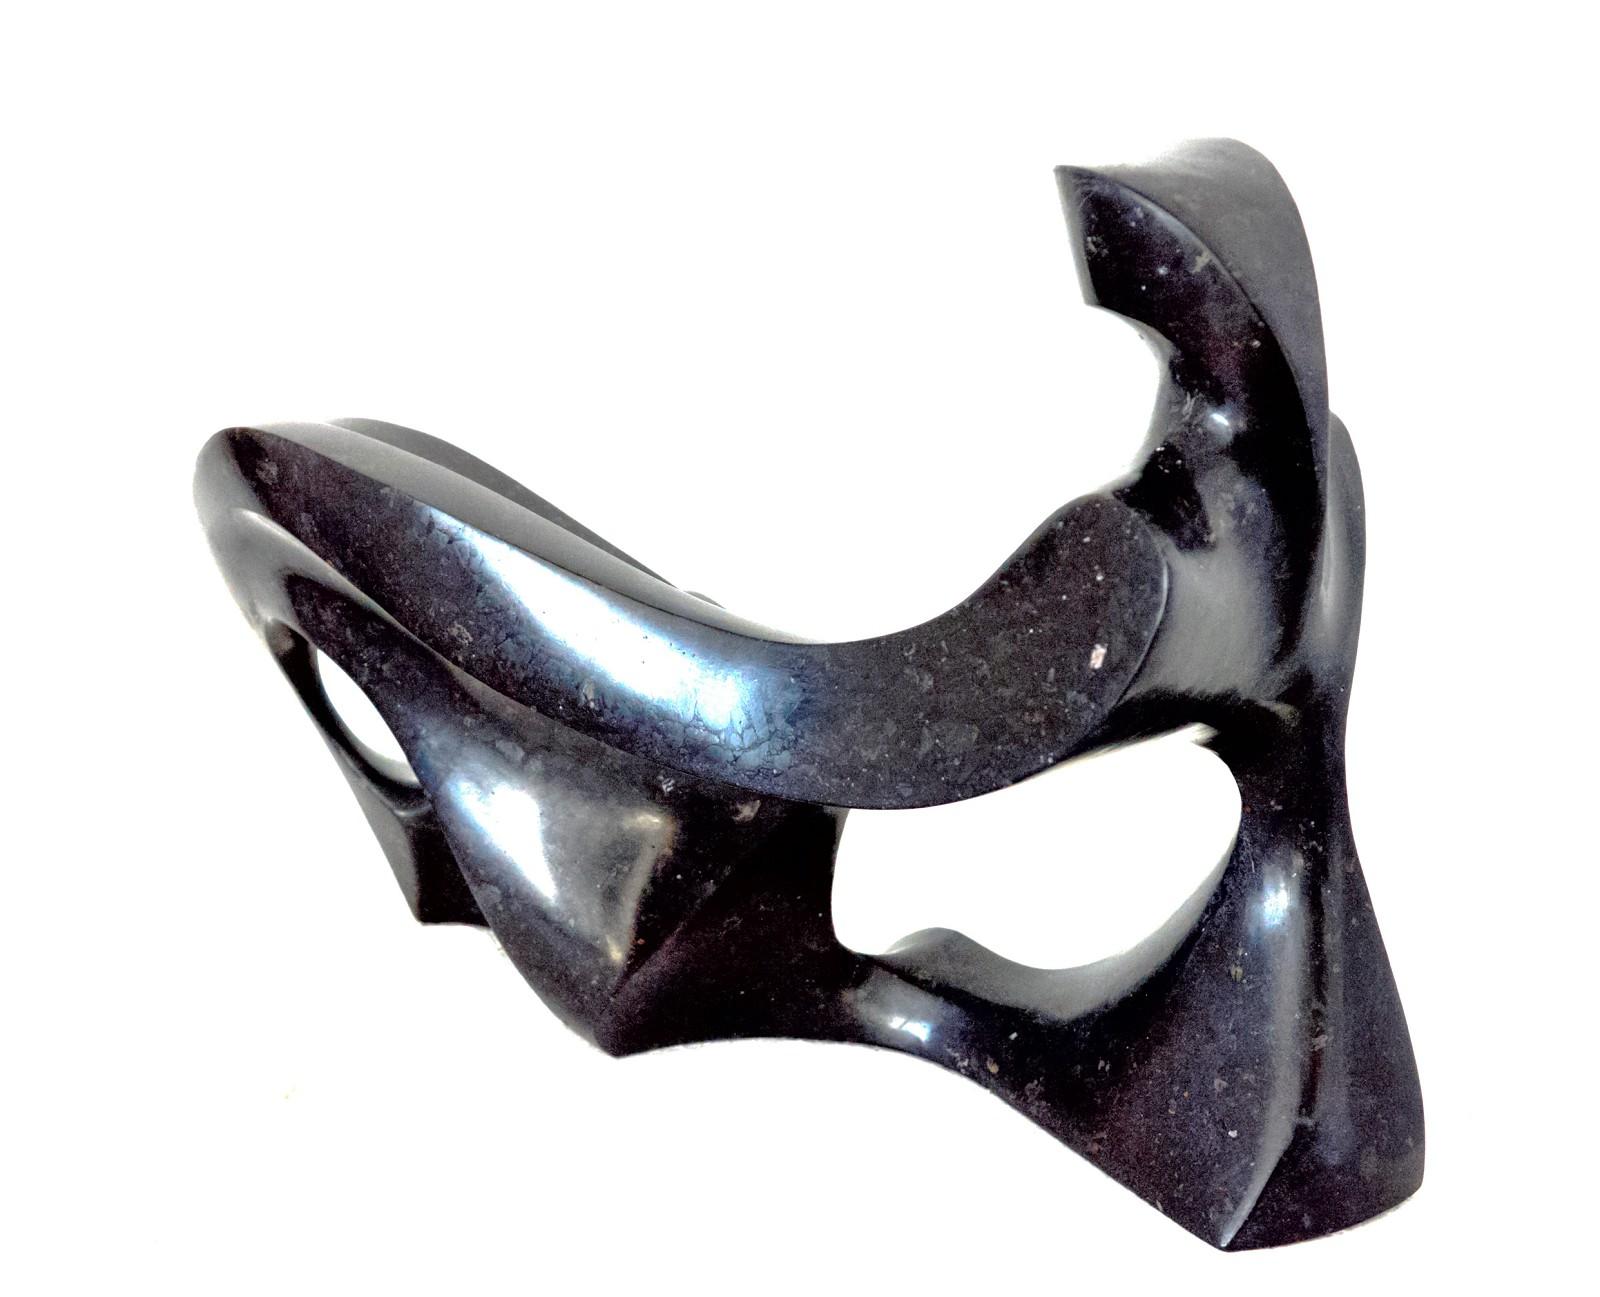 Repose 5/50 - smooth, black granite, figurative, tabletop sculpture - Sculpture by Jeremy Guy